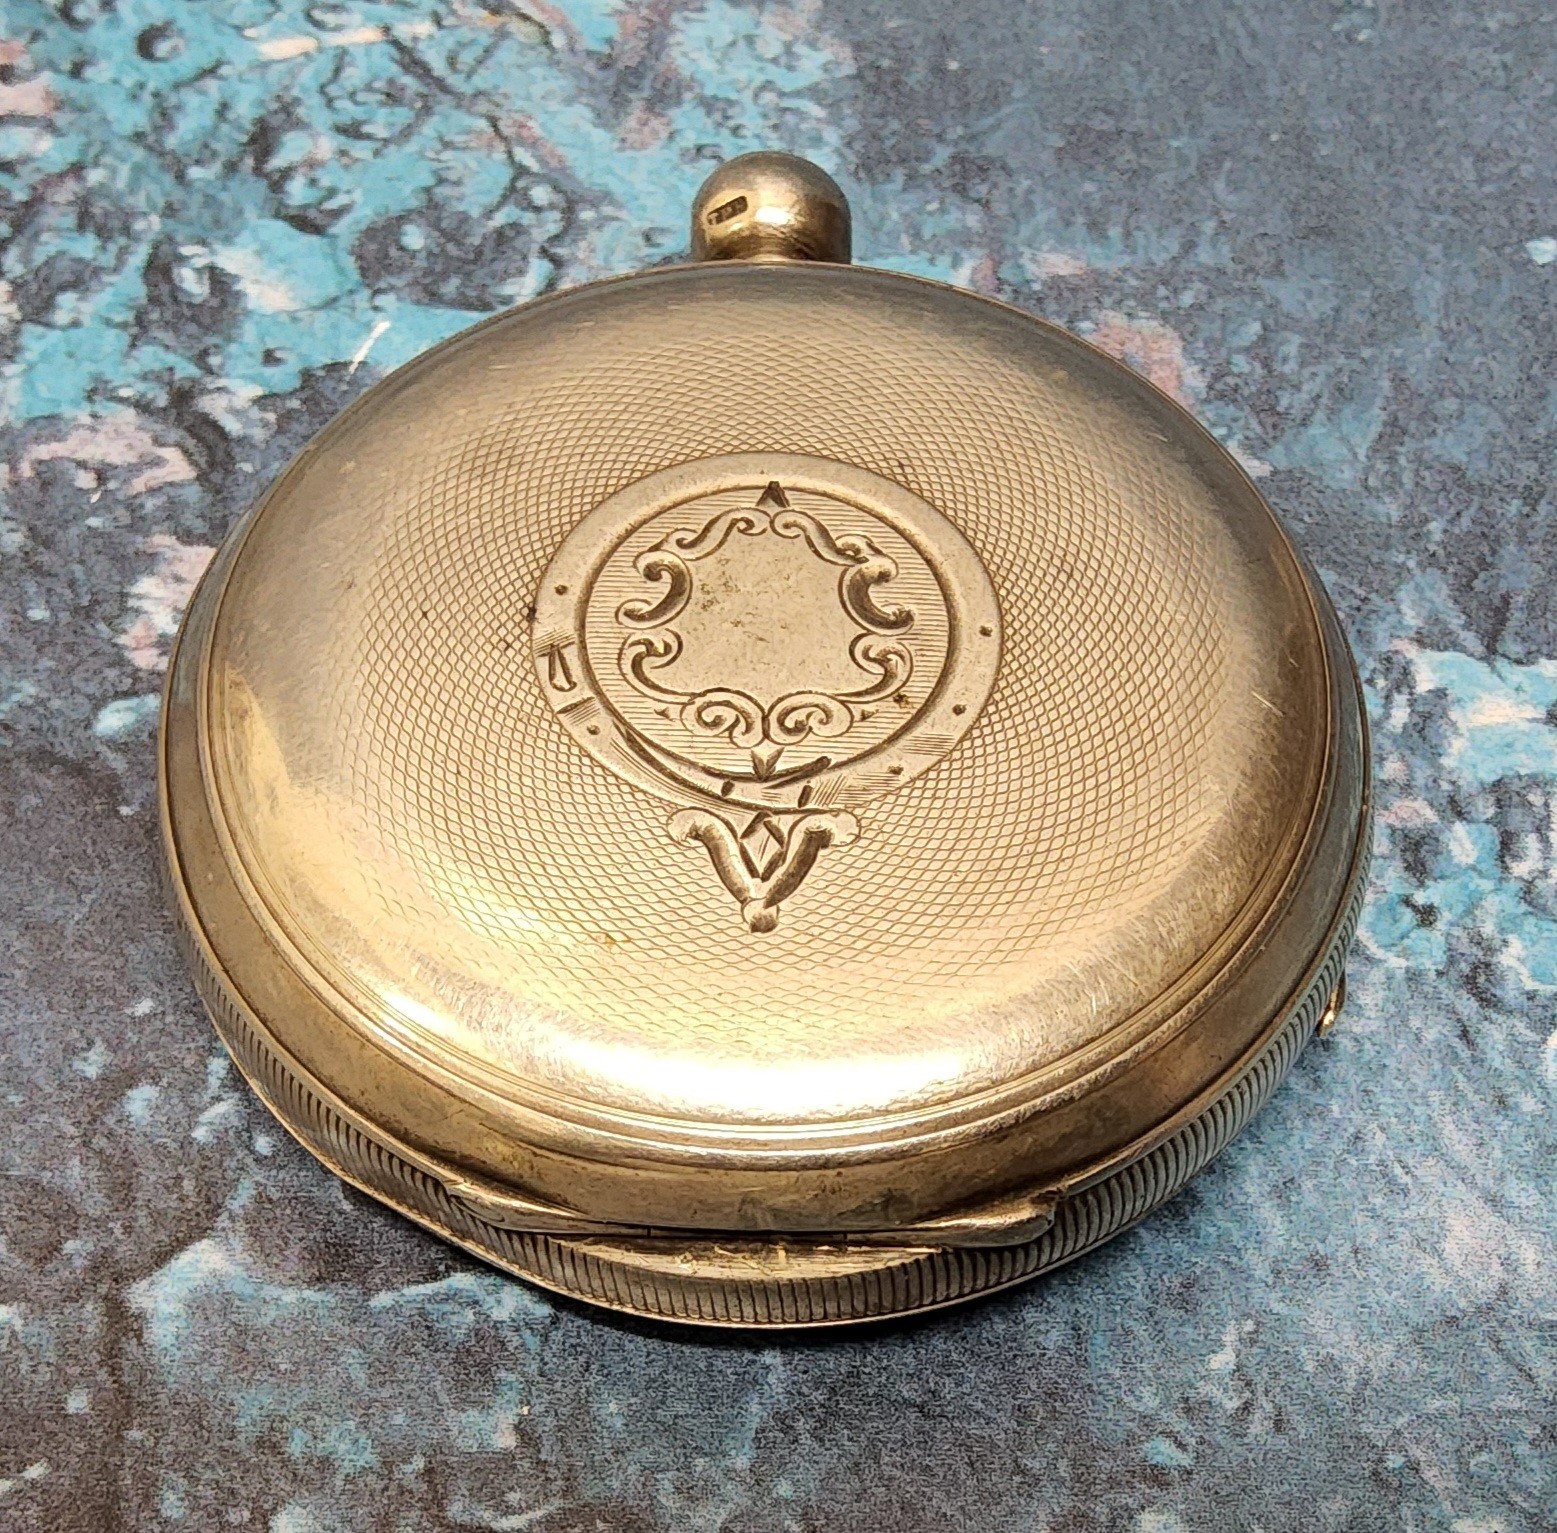 A Victorian silver cased open faced pocket watch, English Lever Revversing Pinion movement, engraved